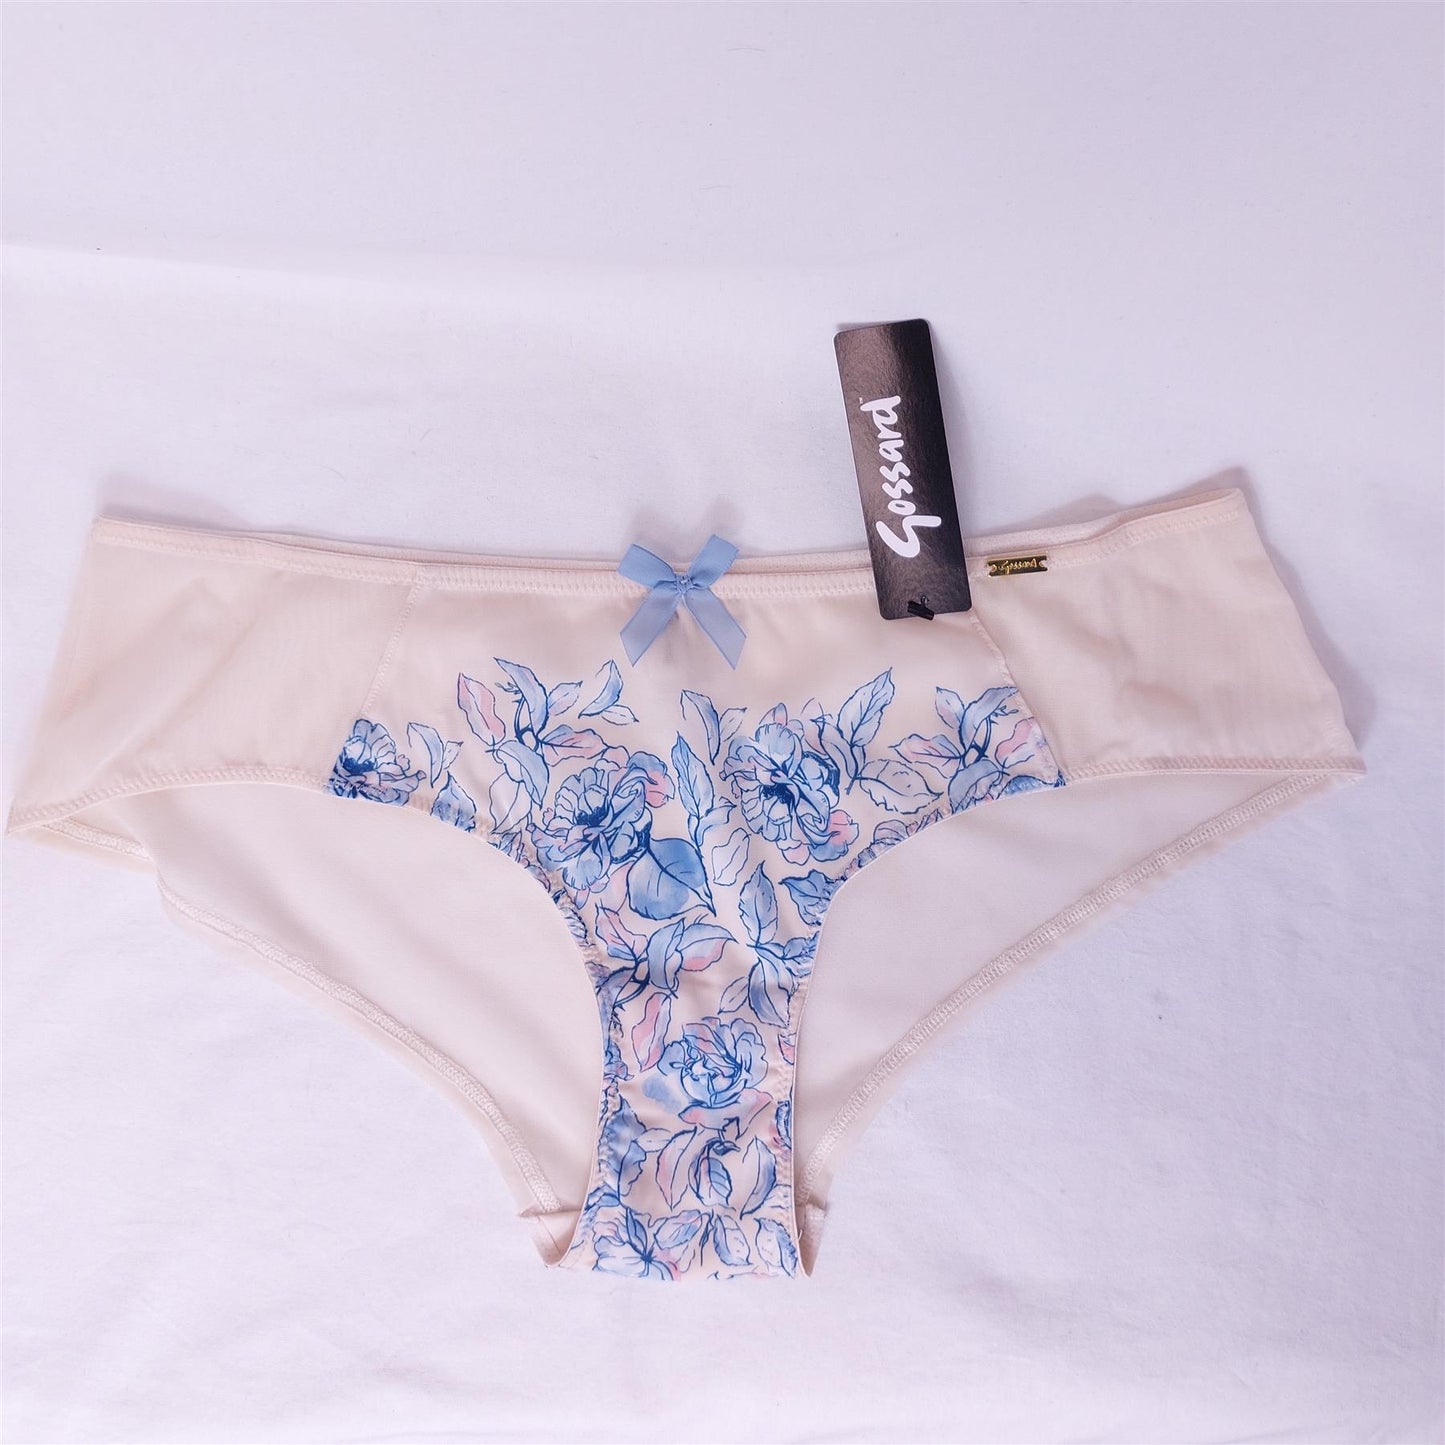 Gossard China Blue Short Brief Knickers Floral Print 12304 New Lingerie